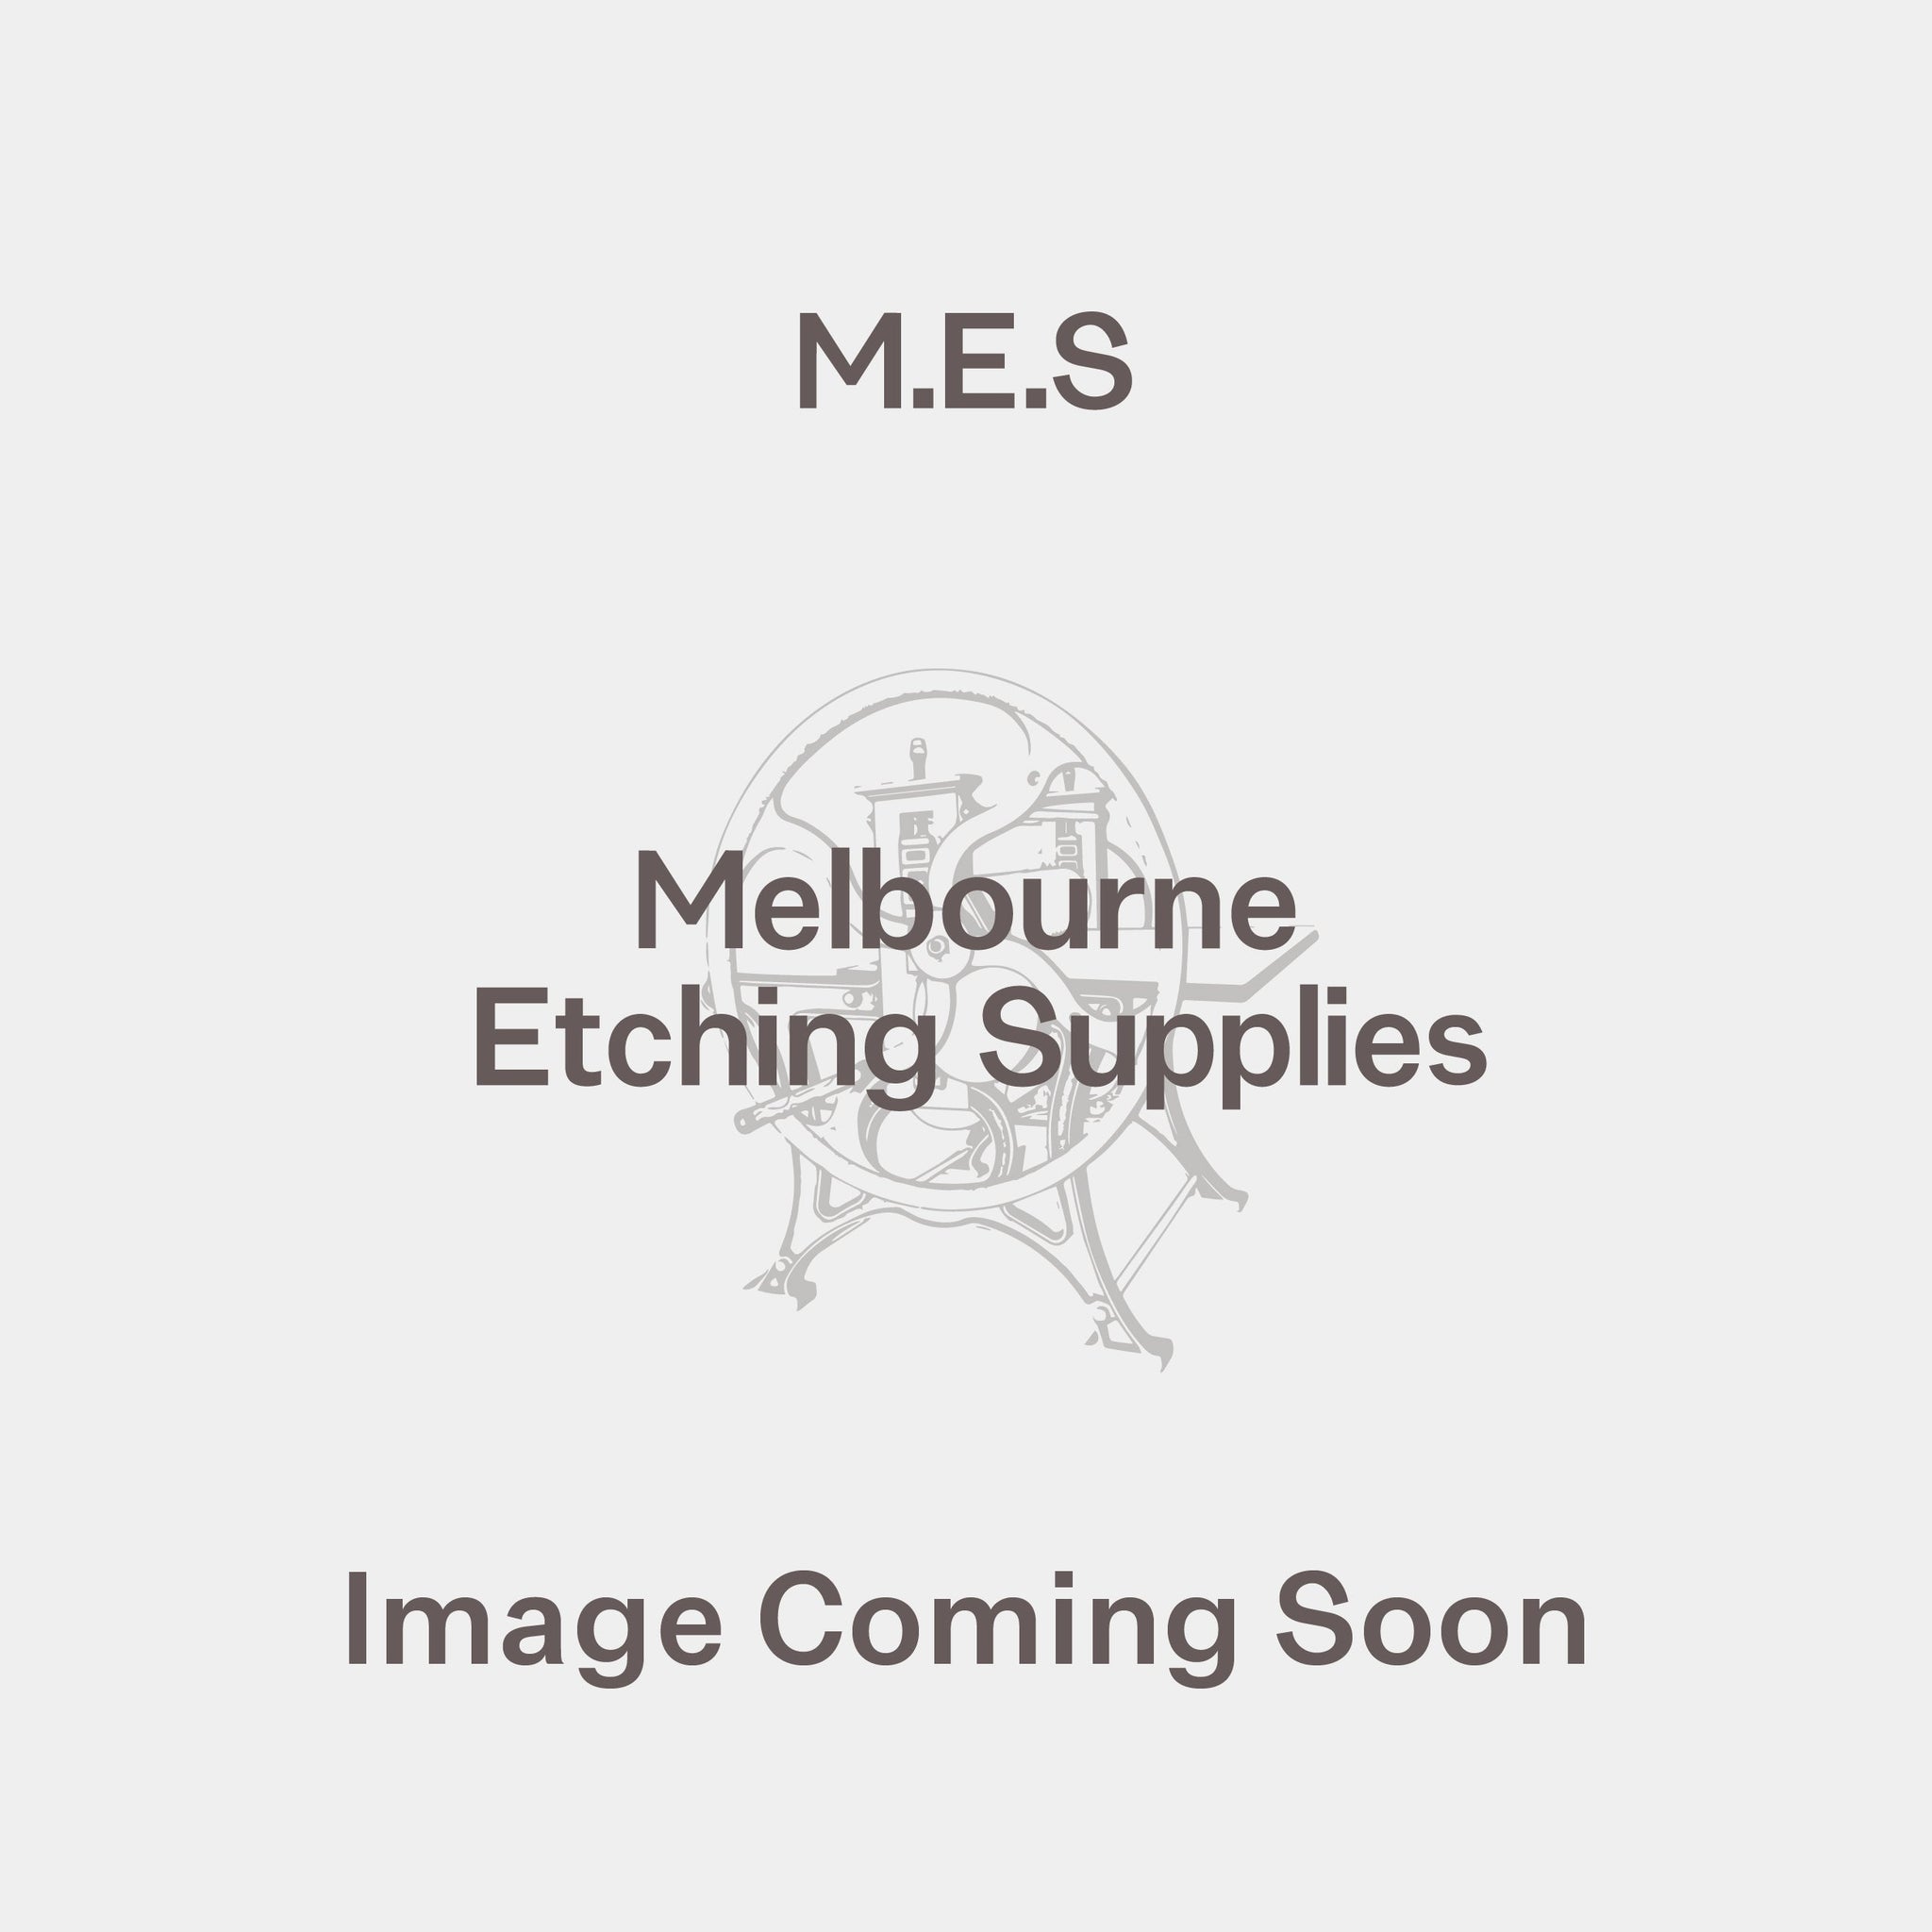 Steel Ruler - Melbourne Etching Supplies